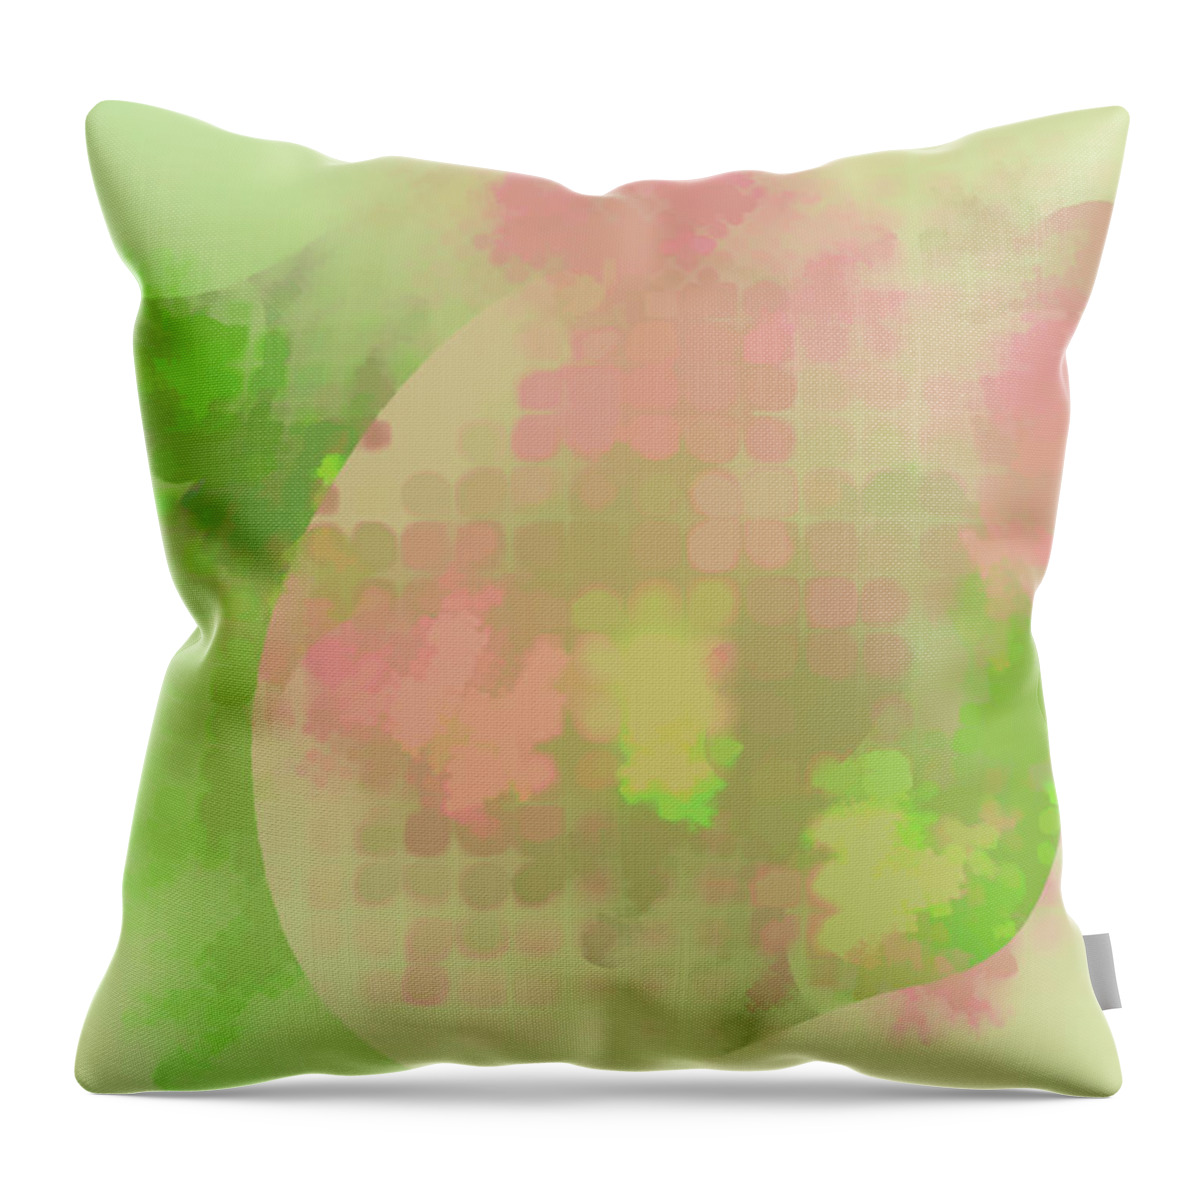 Art Throw Pillow featuring the digital art Demanding the Impossible by Jeff Iverson